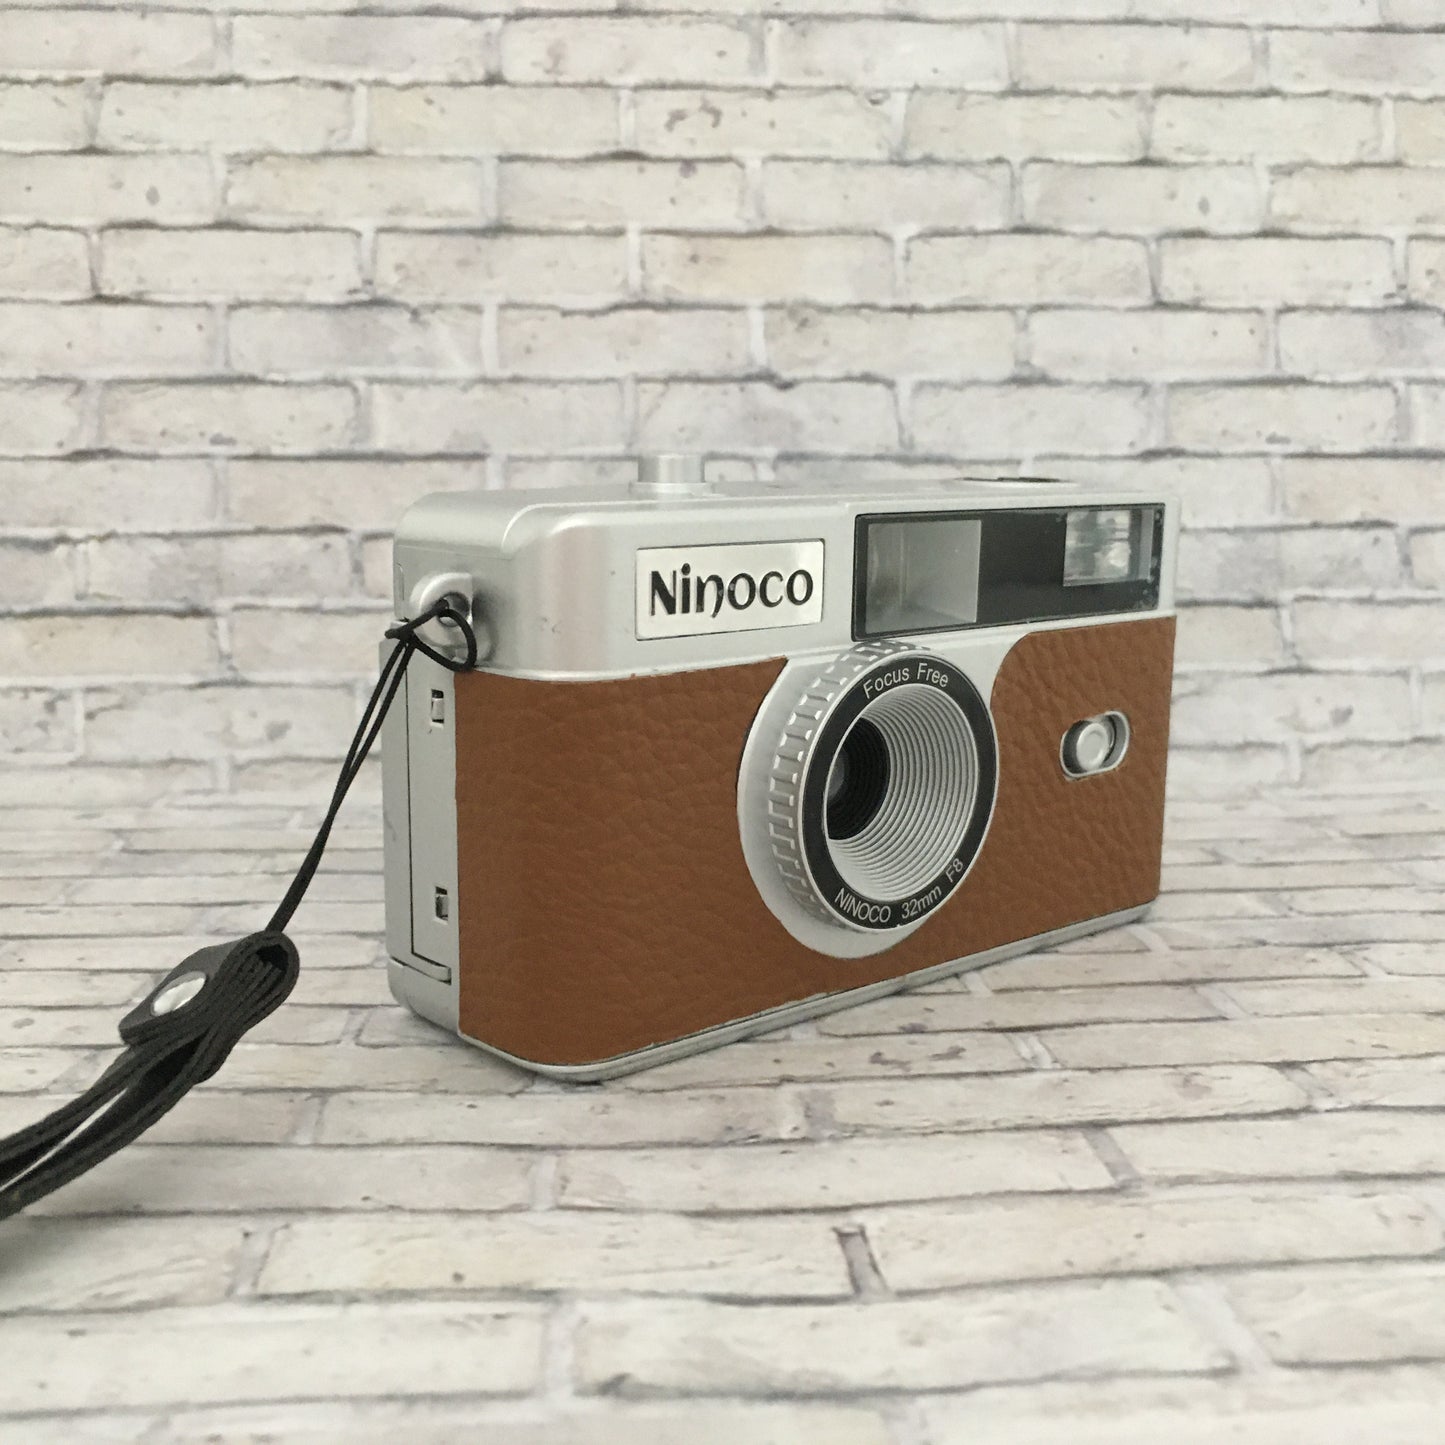 Point & shoot ! Brand new 35mm film camera with cinnamon brown leather